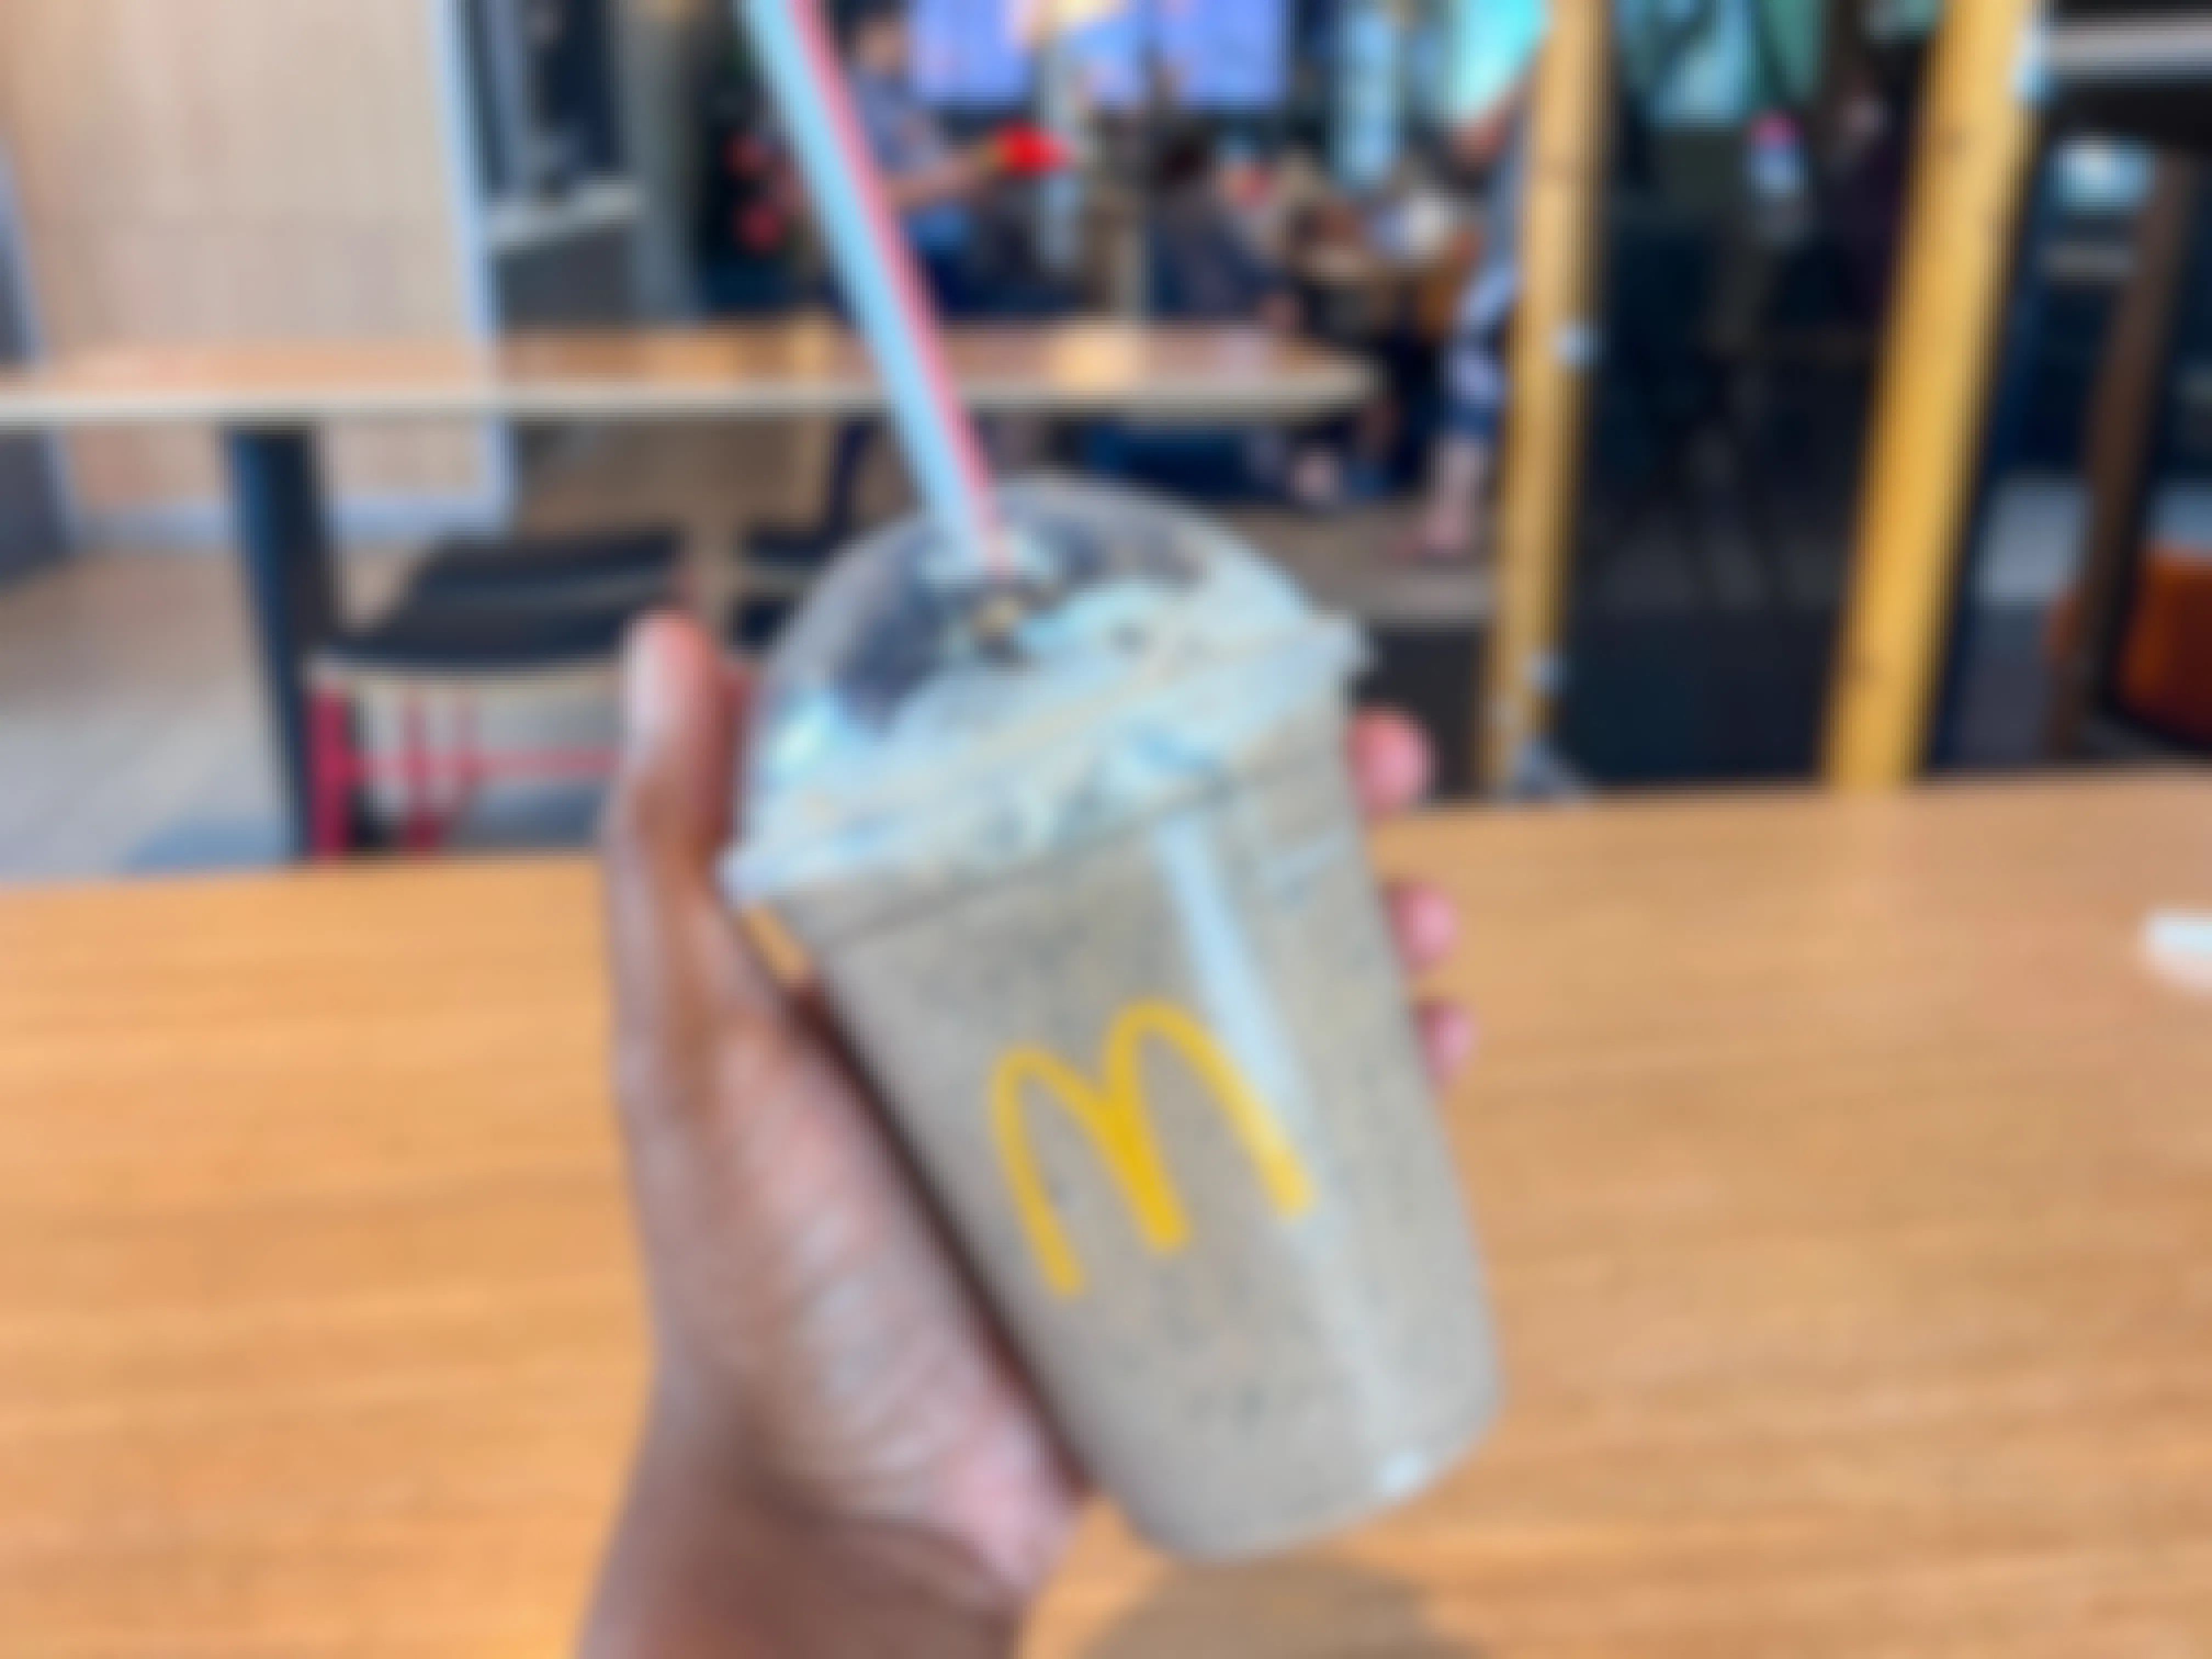 a hand holding a mcdonalds frappe in a mcdonalds restaurant 